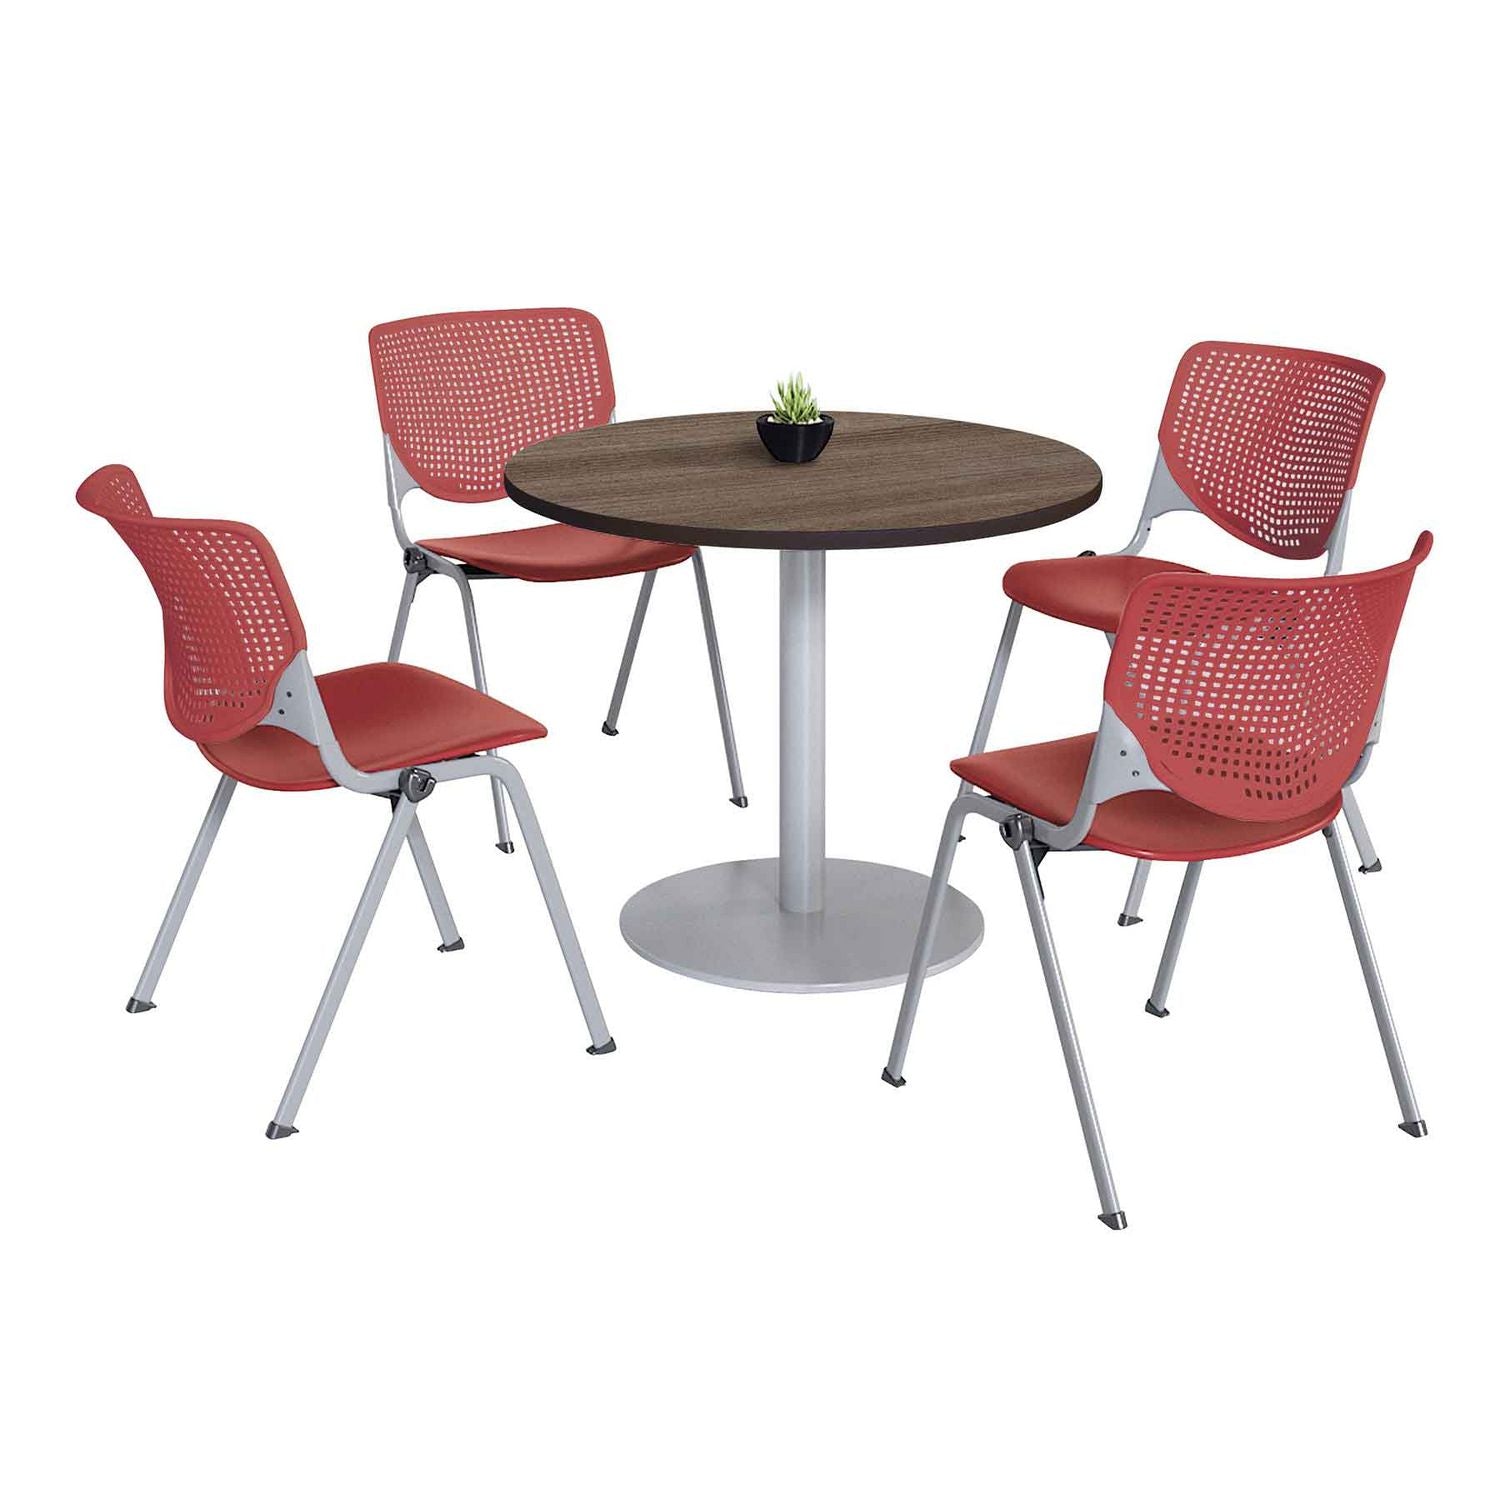 pedestal-table-with-four-coral-kool-series-chairs-round-36-dia-x-29h-studio-teak-ships-in-4-6-business-days_kfi811774036917 - 1